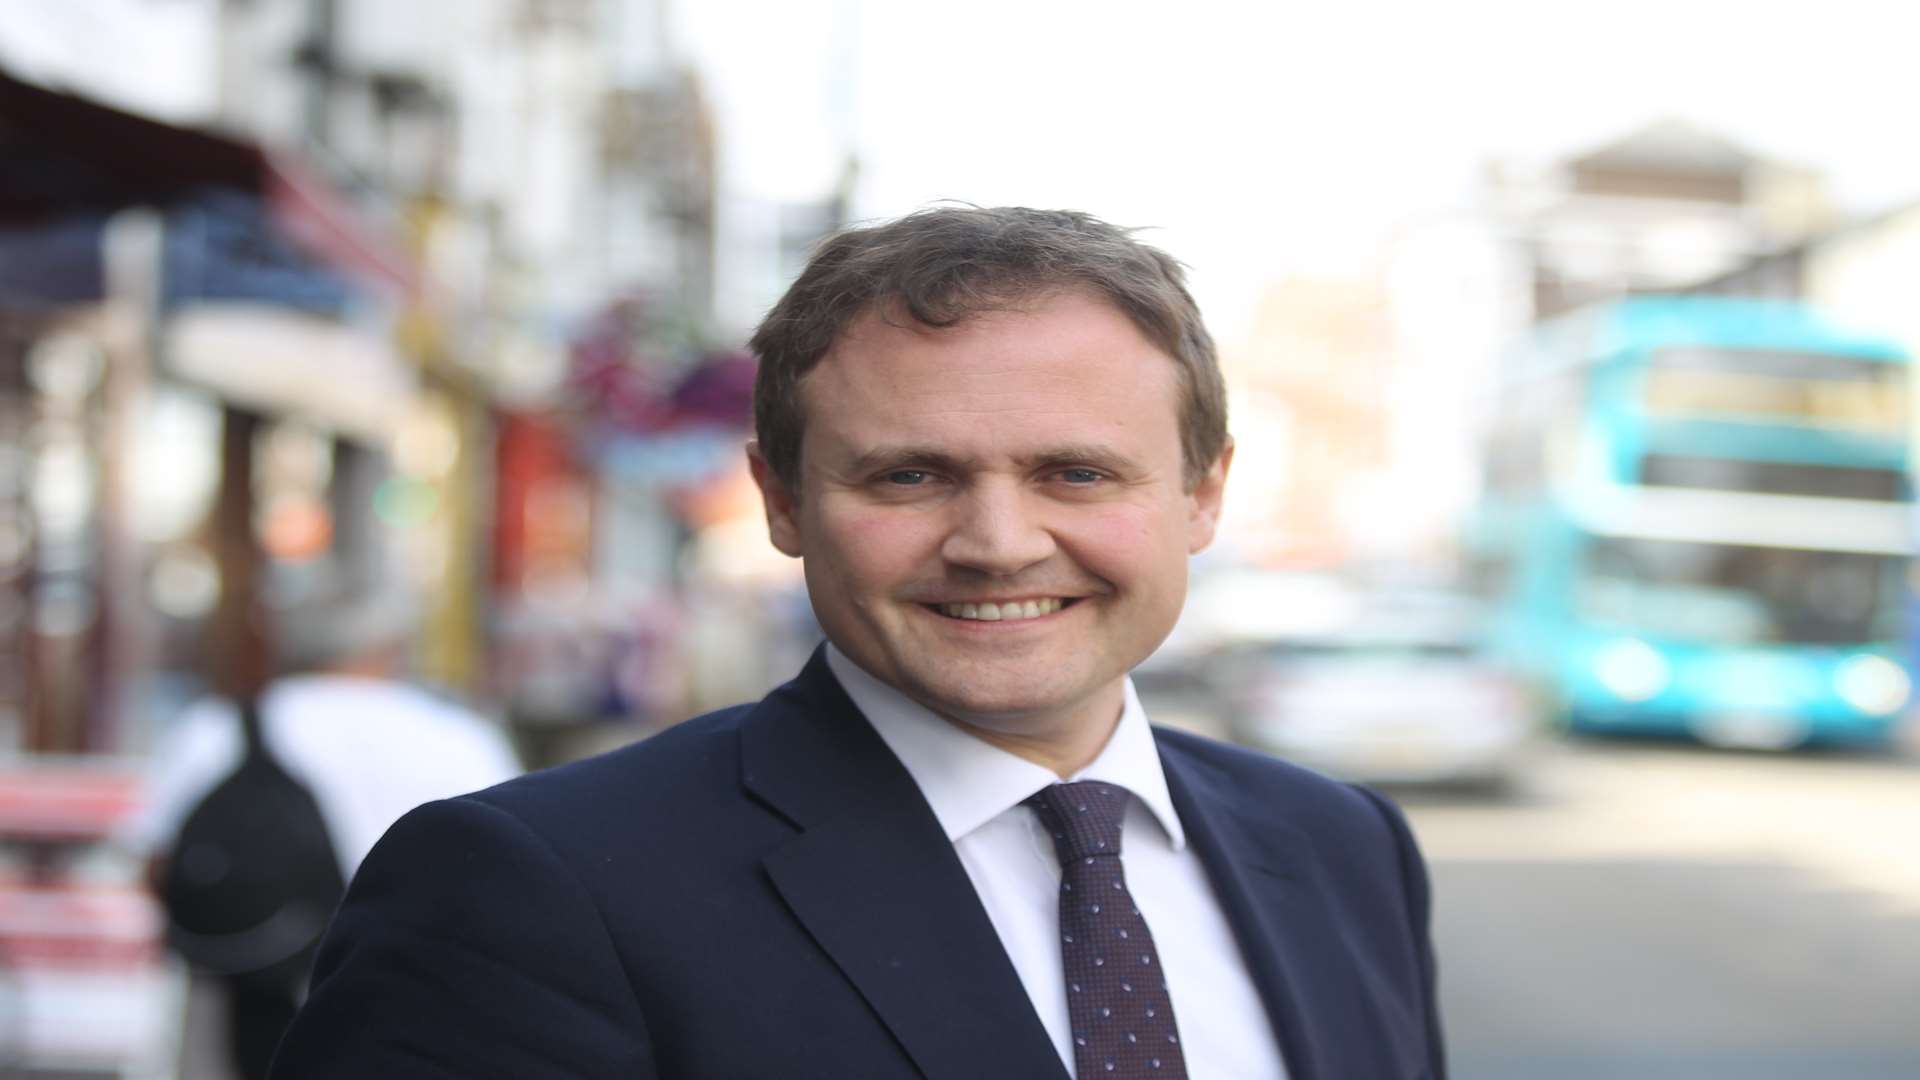 Tom Tugendhat, prospective parliamentary candidate for Tonbridge and Malling